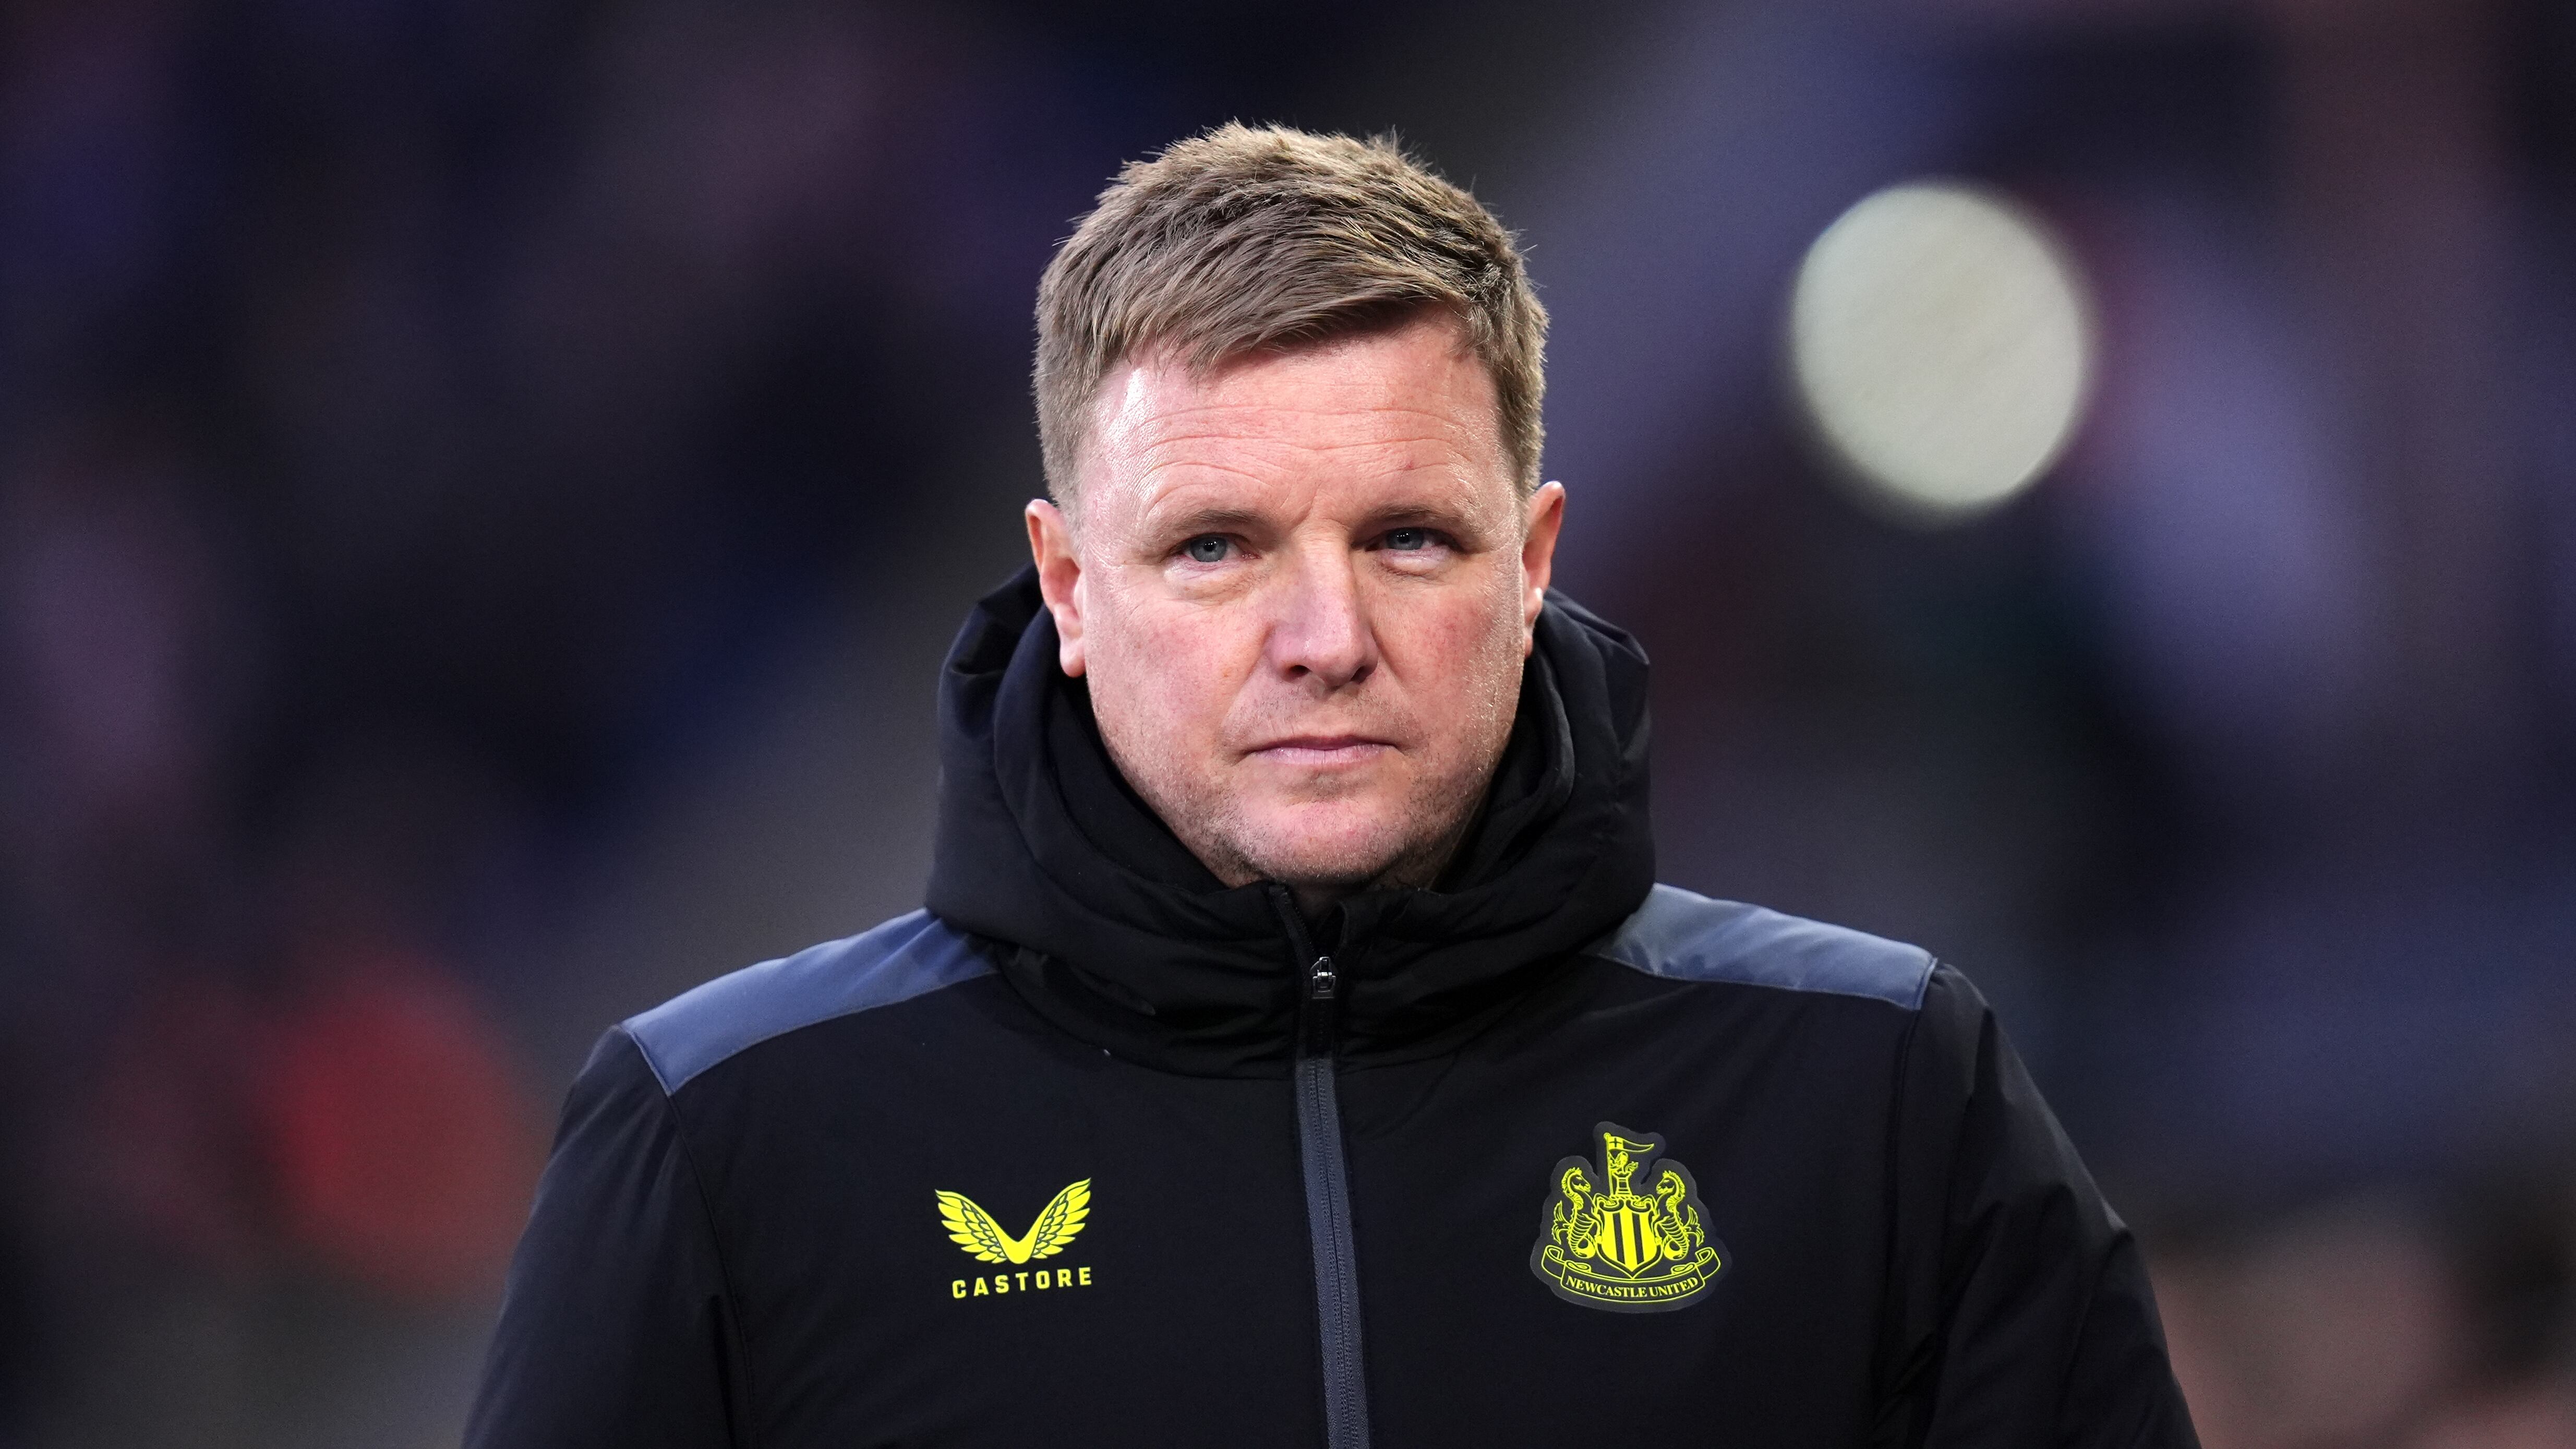 Newcastle boss Eddie Howe has called for patience as the club attempts to build for lasting success